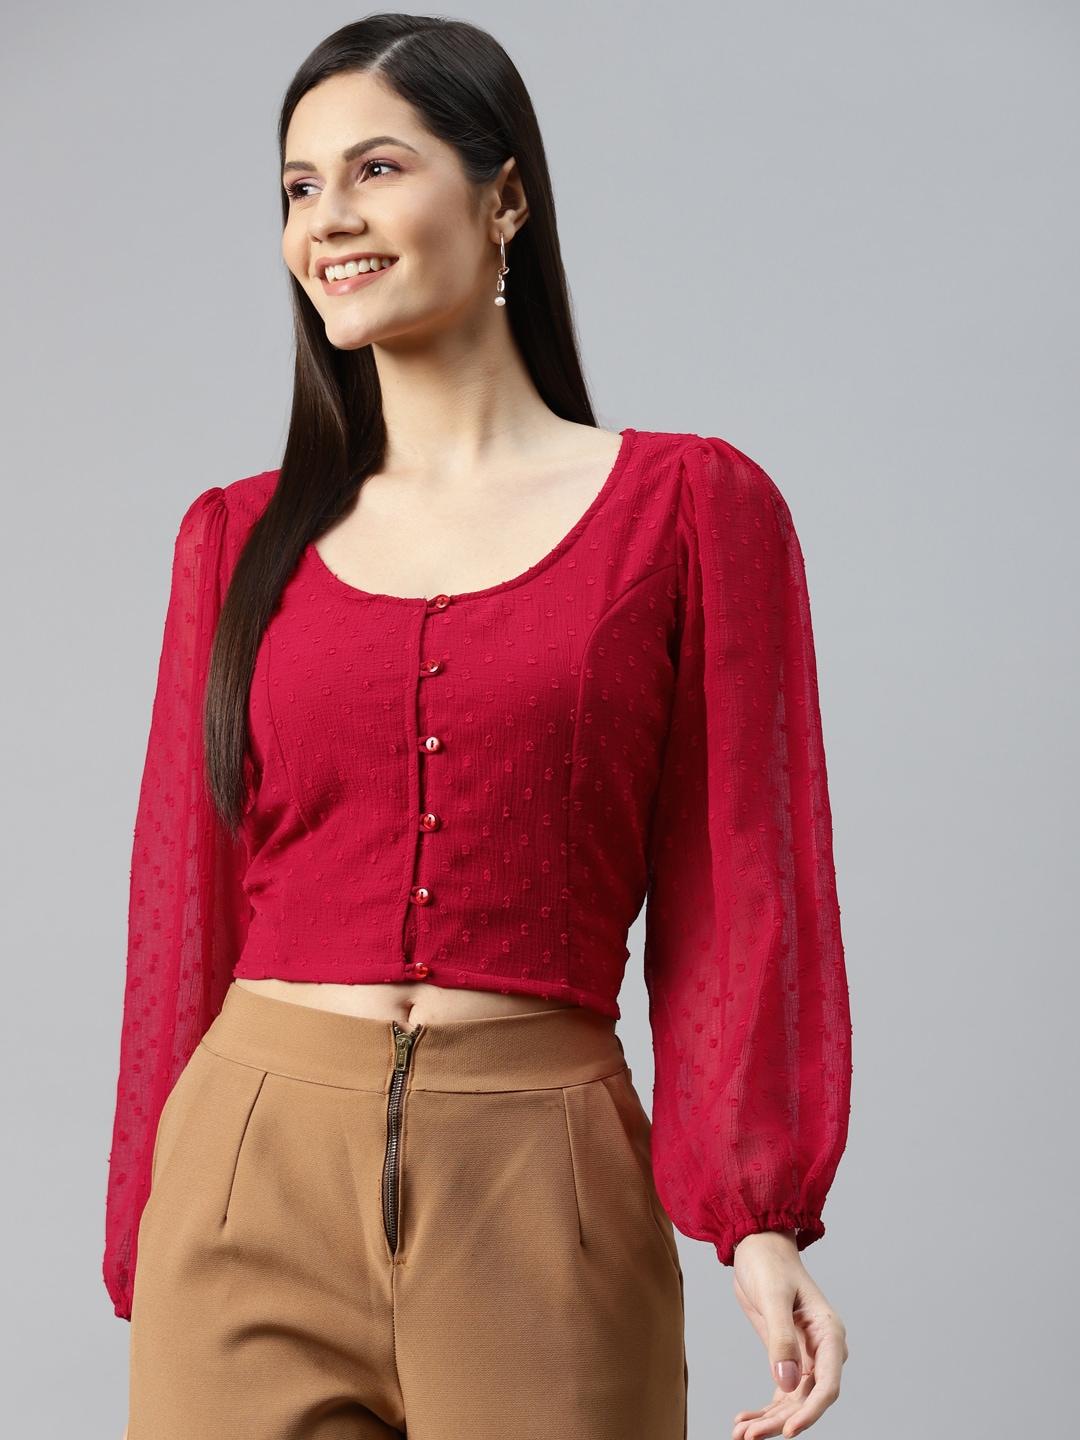 pluss-red-shirt-style-crop-top